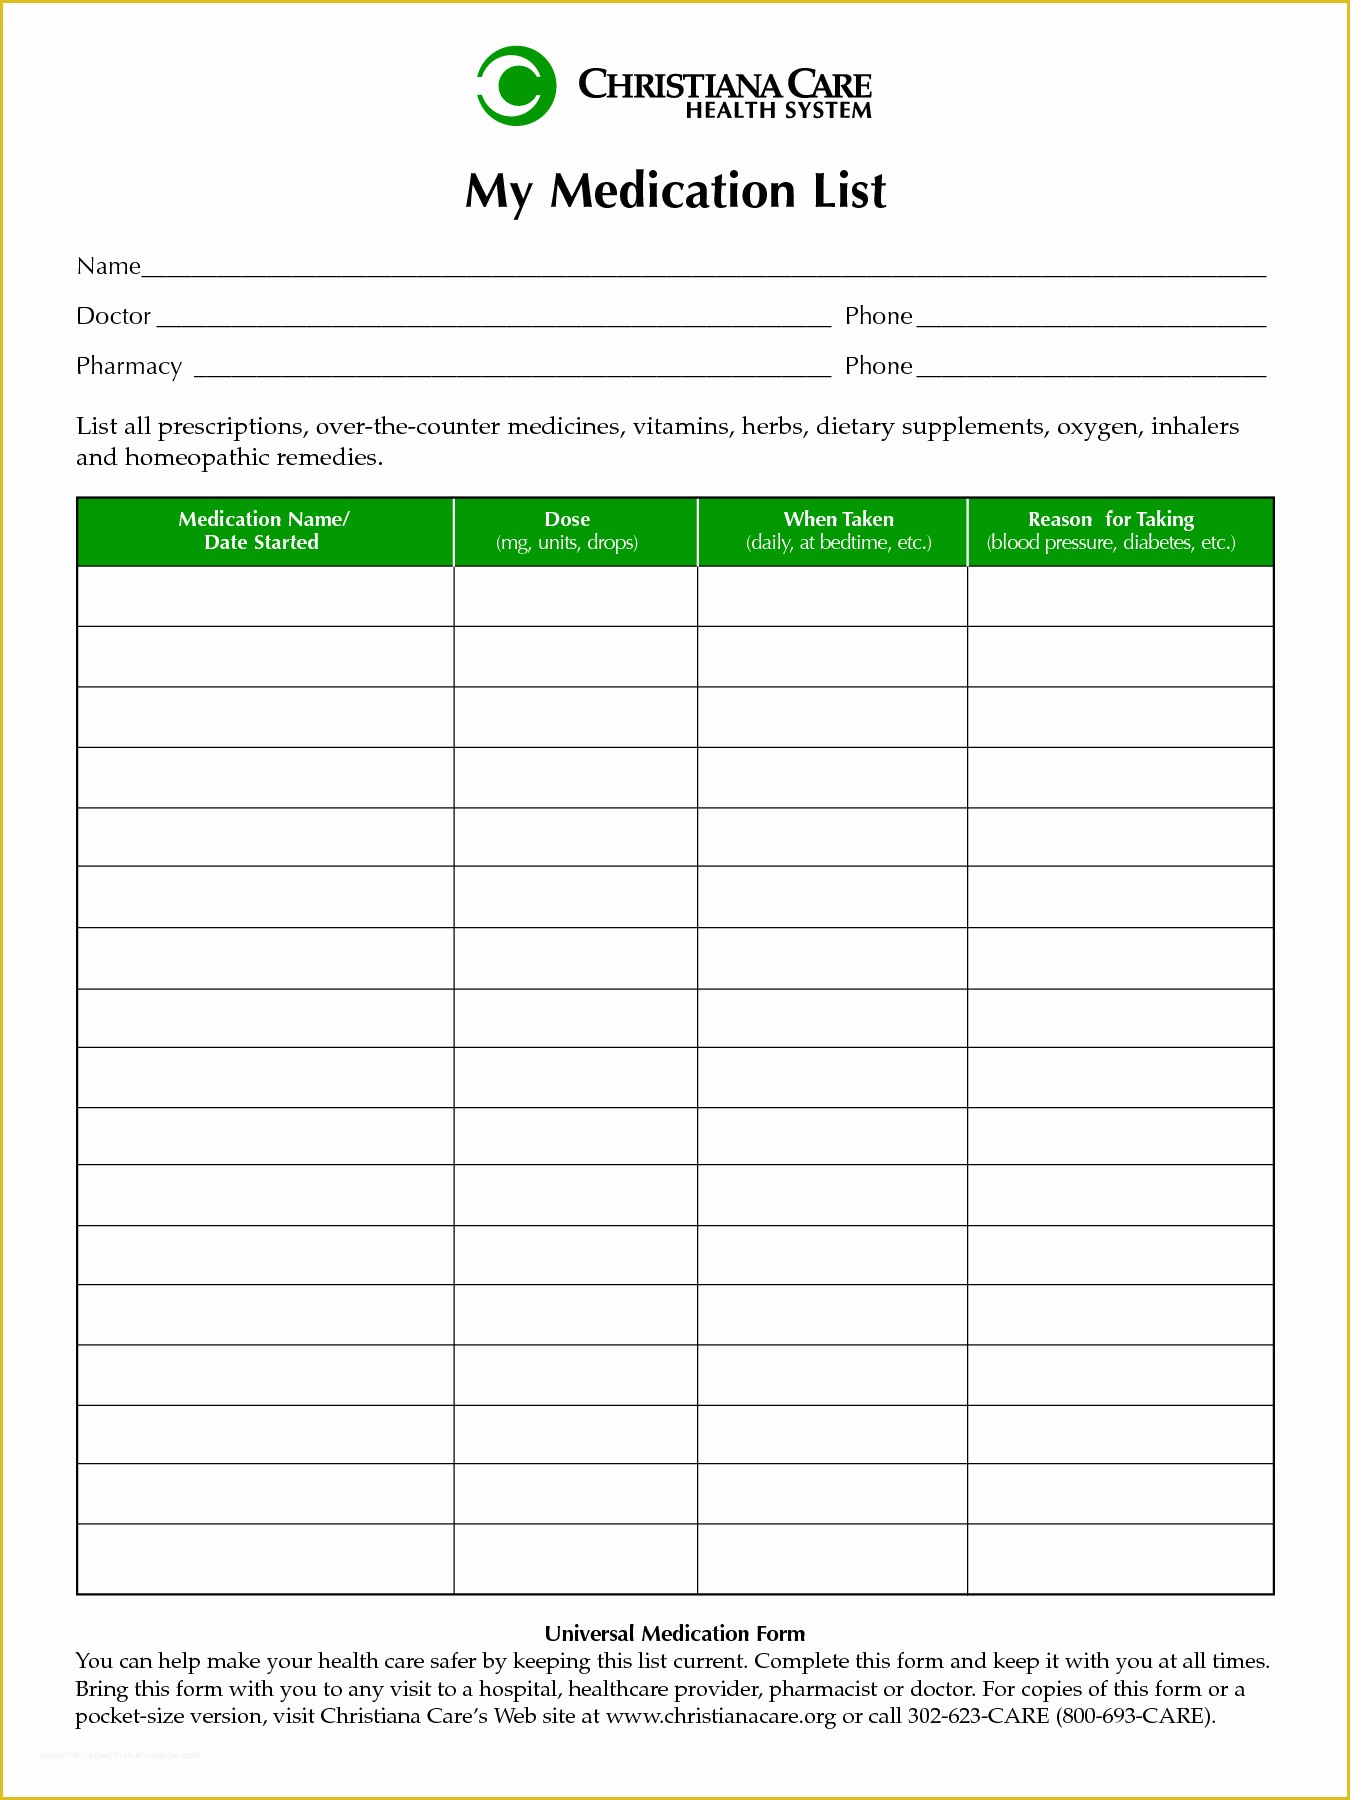 Medication List Template Free Download Of Printable Medication List to Pin On Pinterest